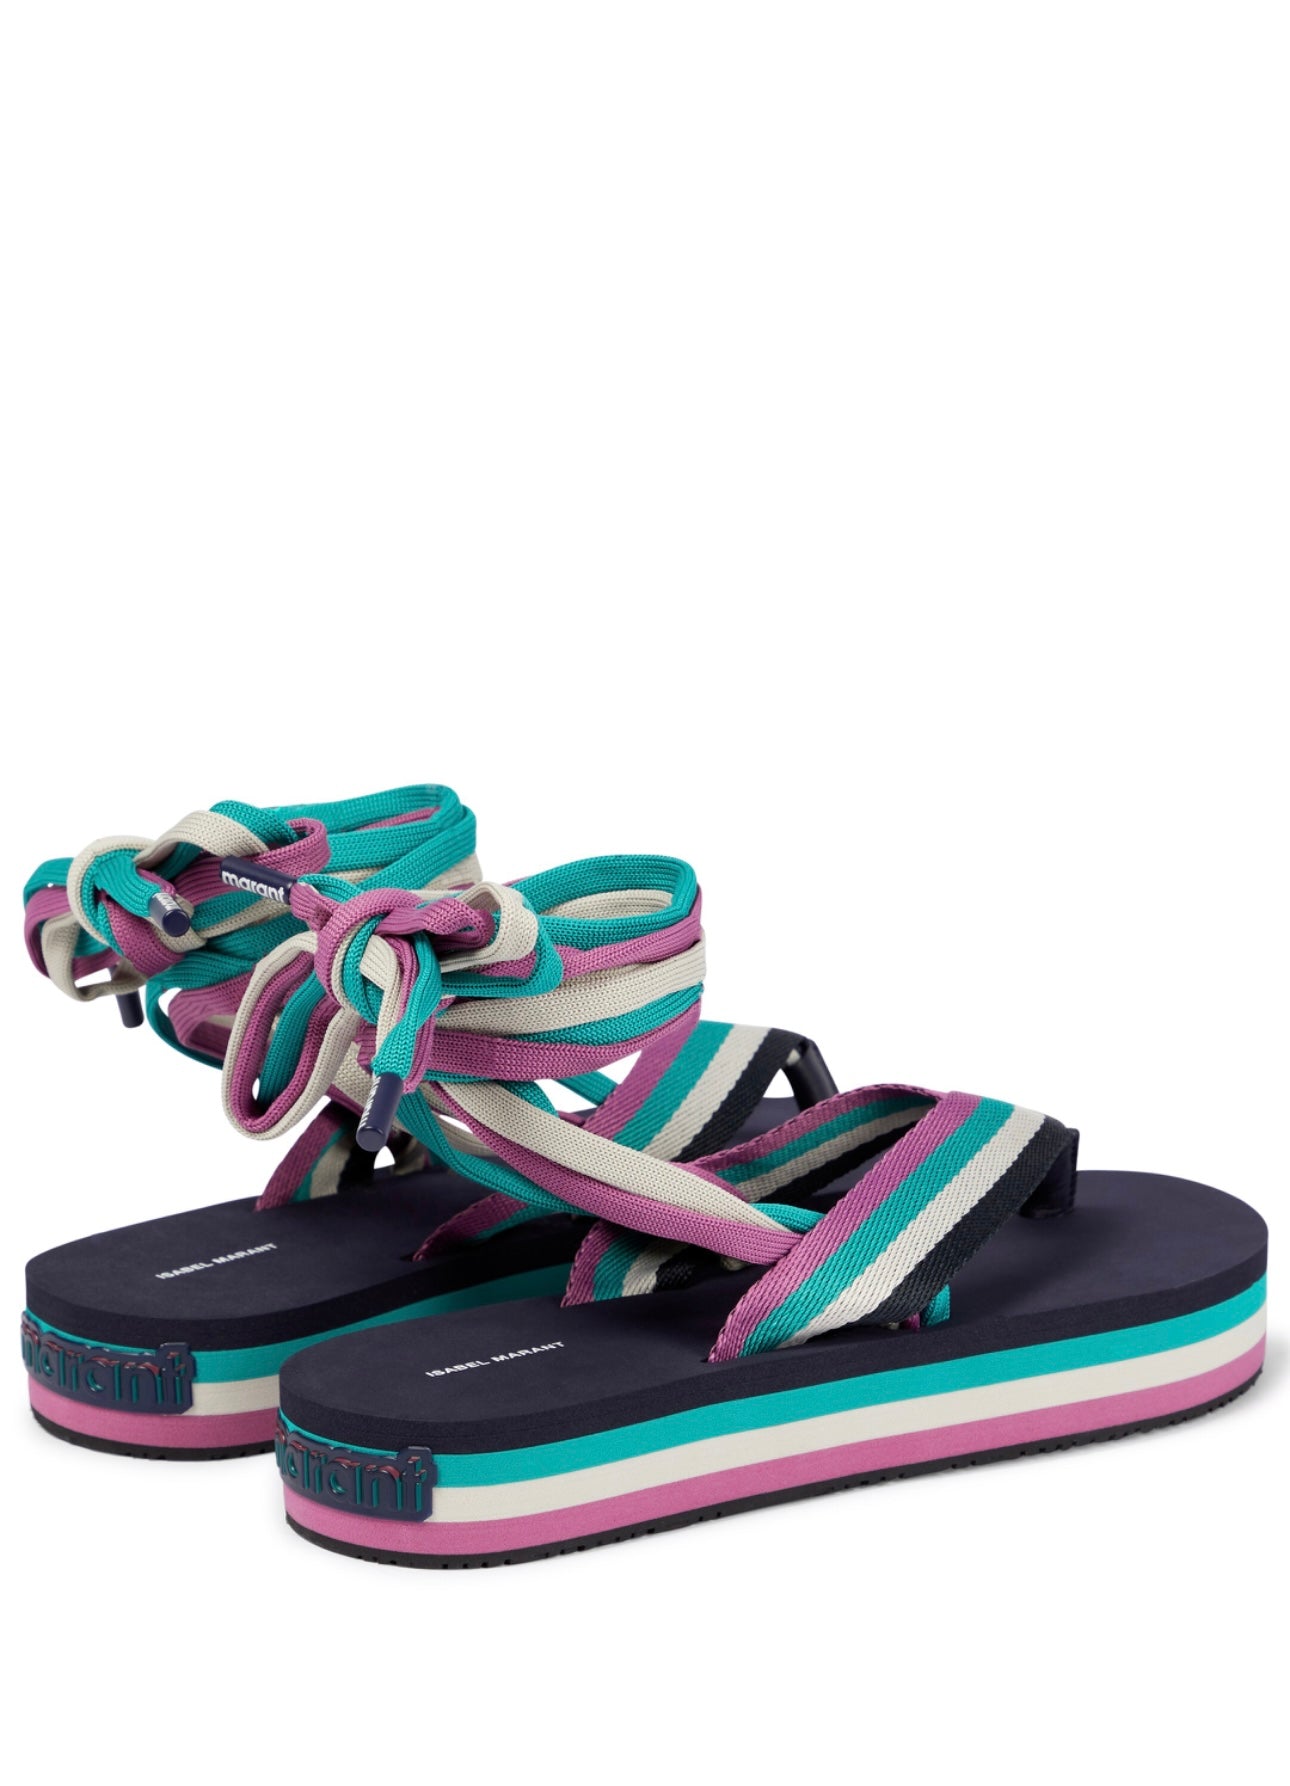 ISABEL MARANT
Tuoni striped thong sandals